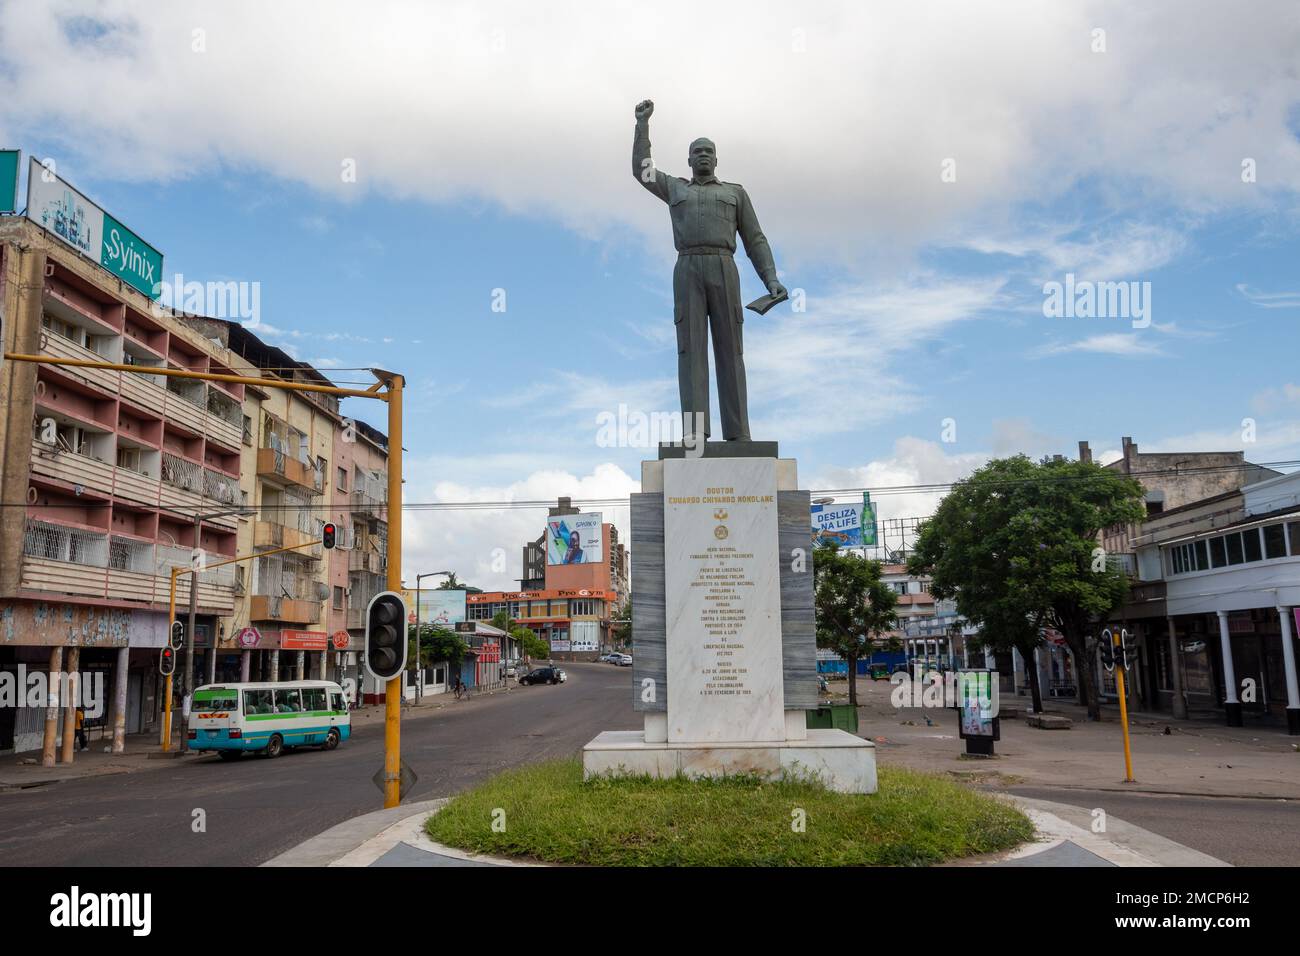 Eduardo Chivambo Mondlane, the symbol of Mozambican resistance: statue depicts him holding a book and fist raised Stock Photo